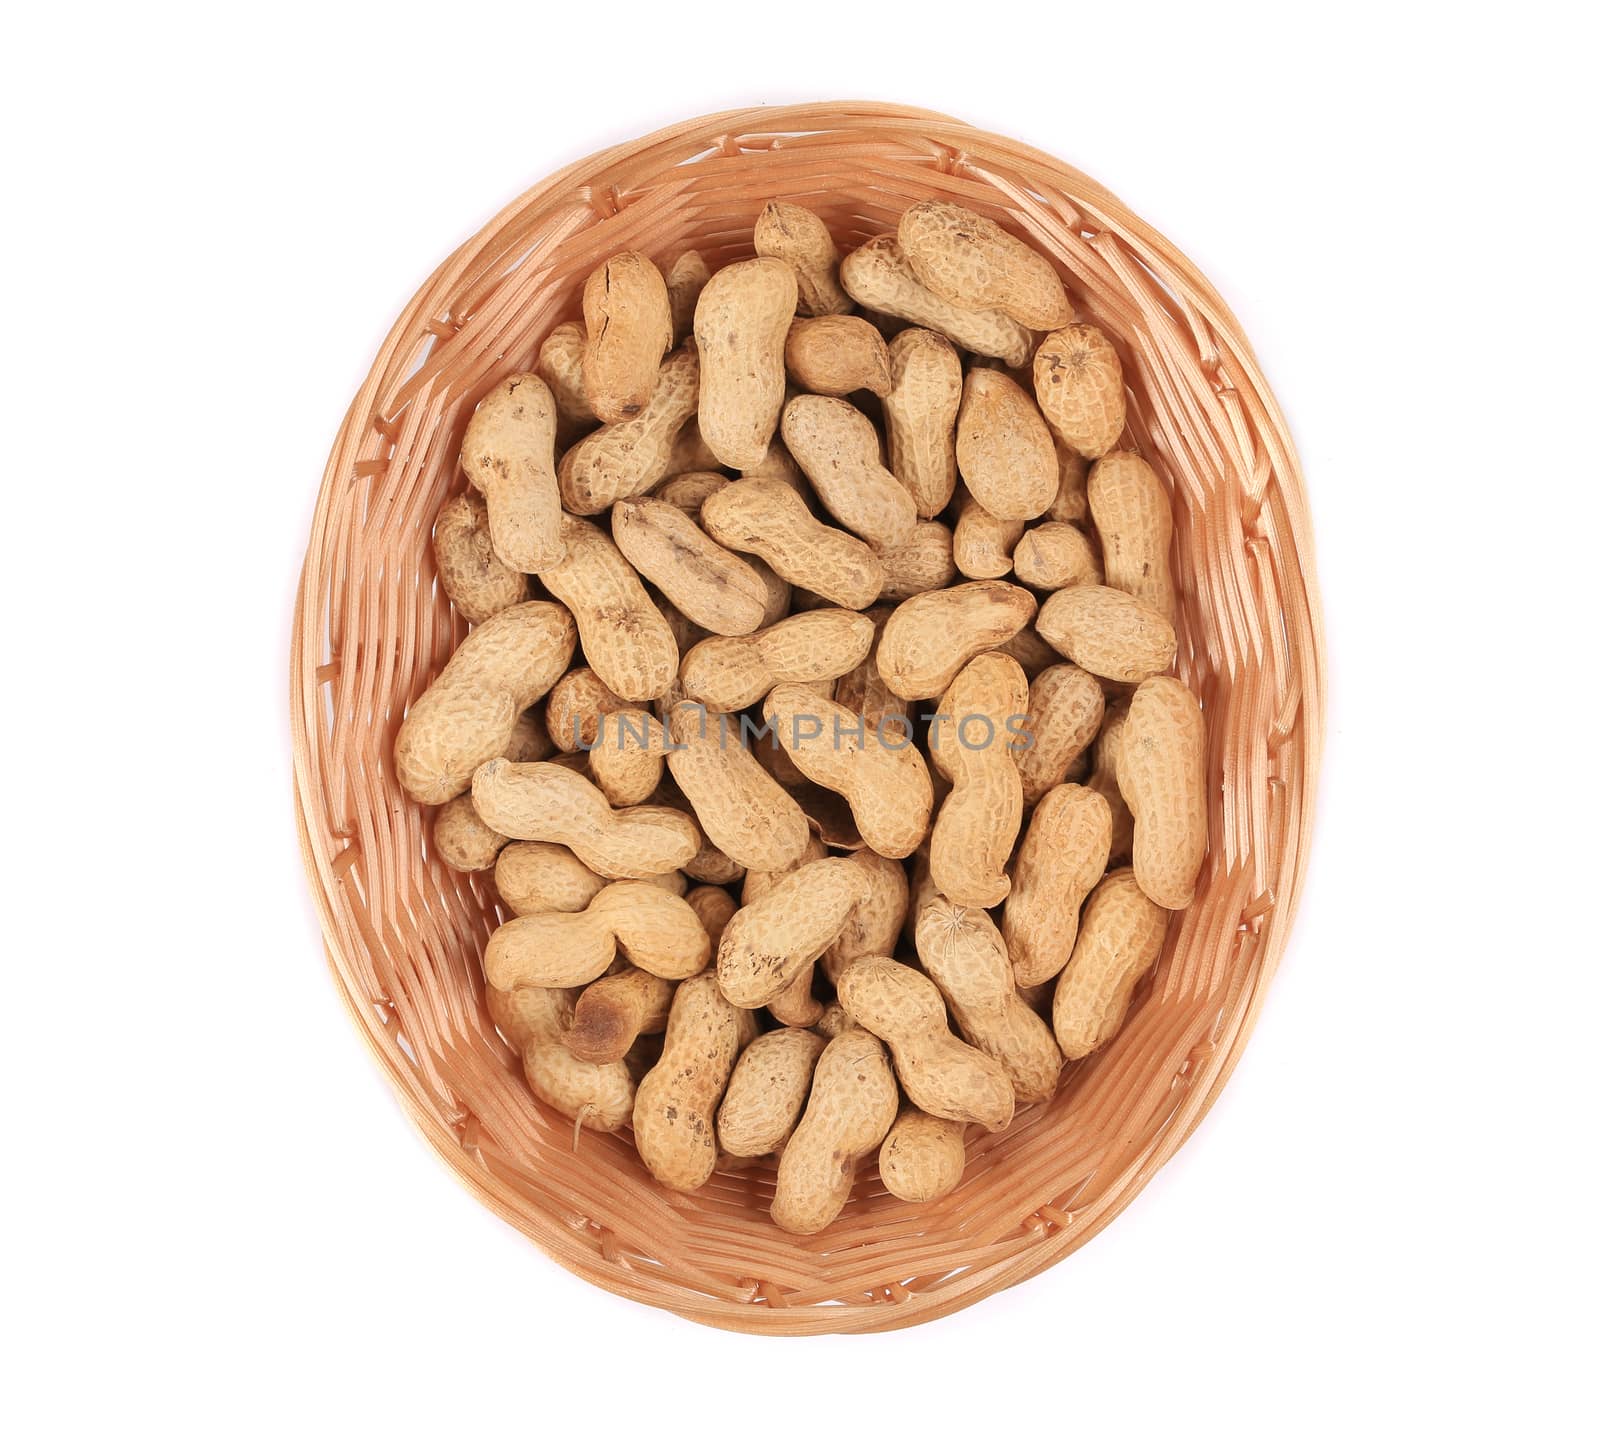 Basket full with peanuts. Isolated on a white background.